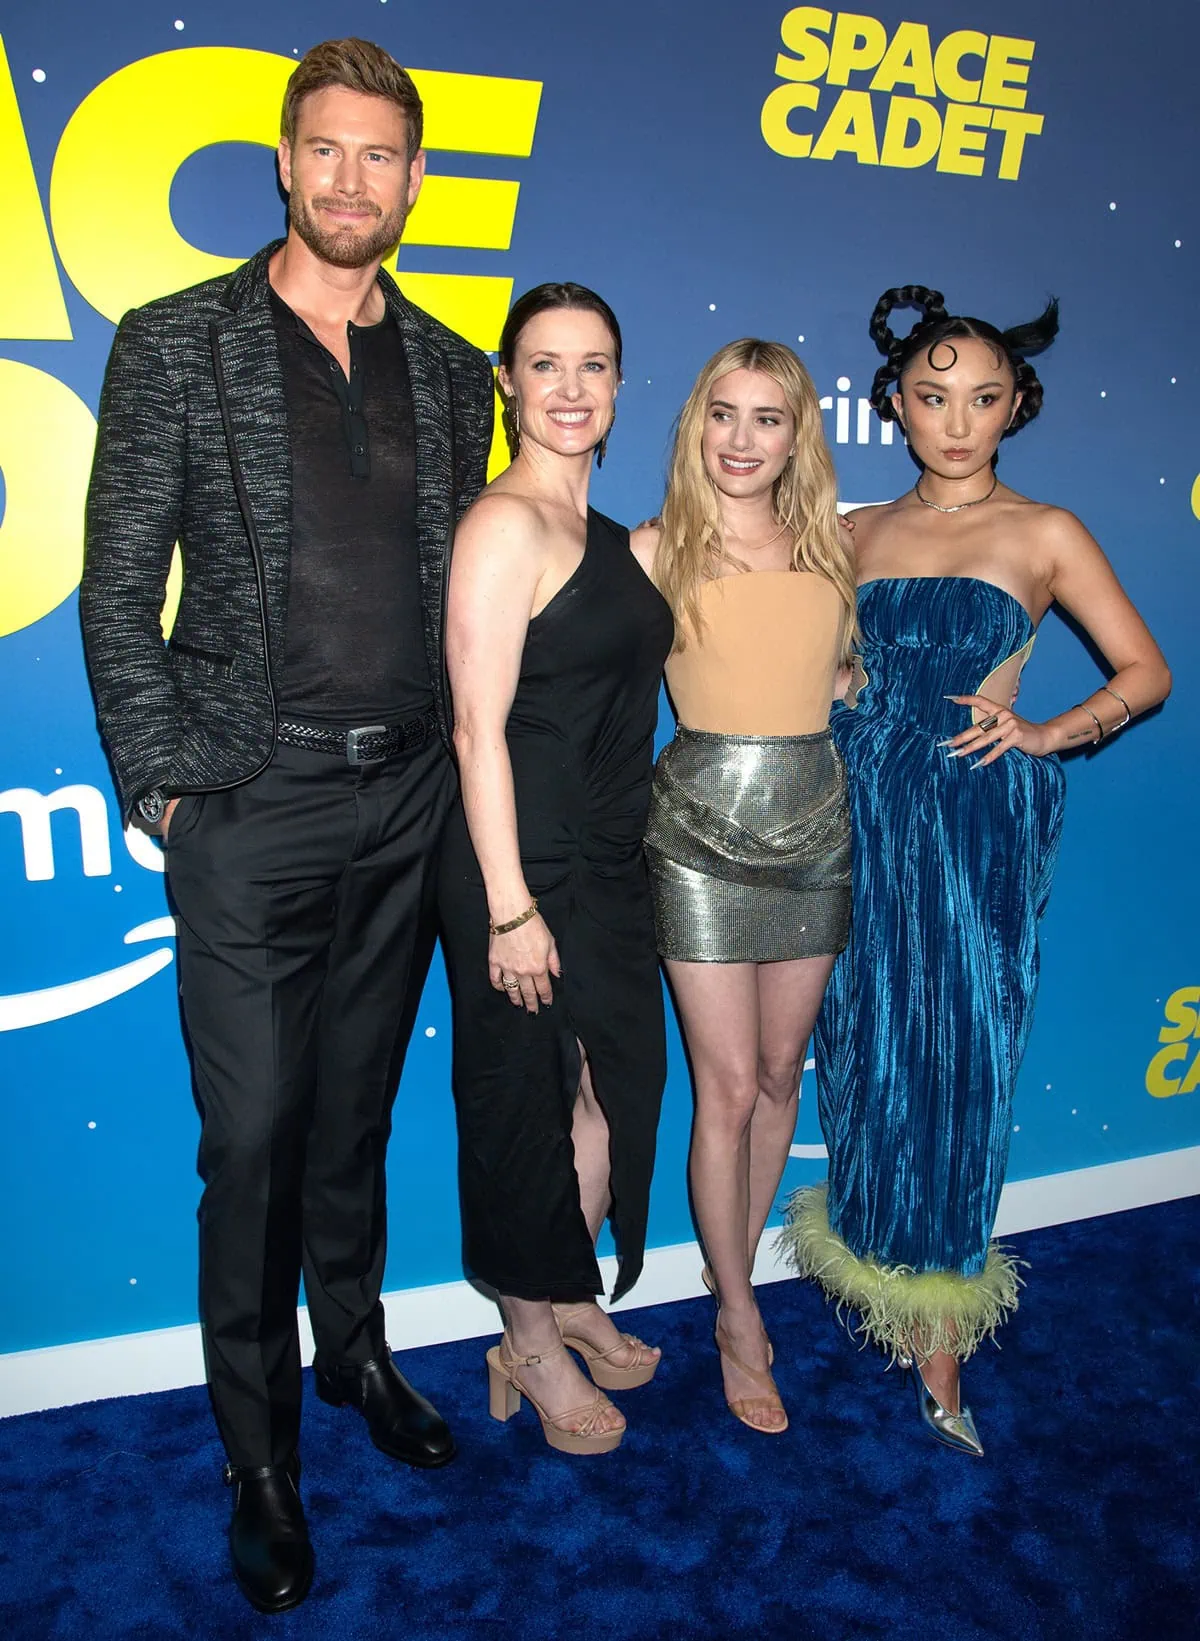 Tom Hopper, towering at 6'5" (196 cm), makes quite the impression alongside Liz Garcia, Emma Roberts, and Poppy Liu at the Space Cadet premiere